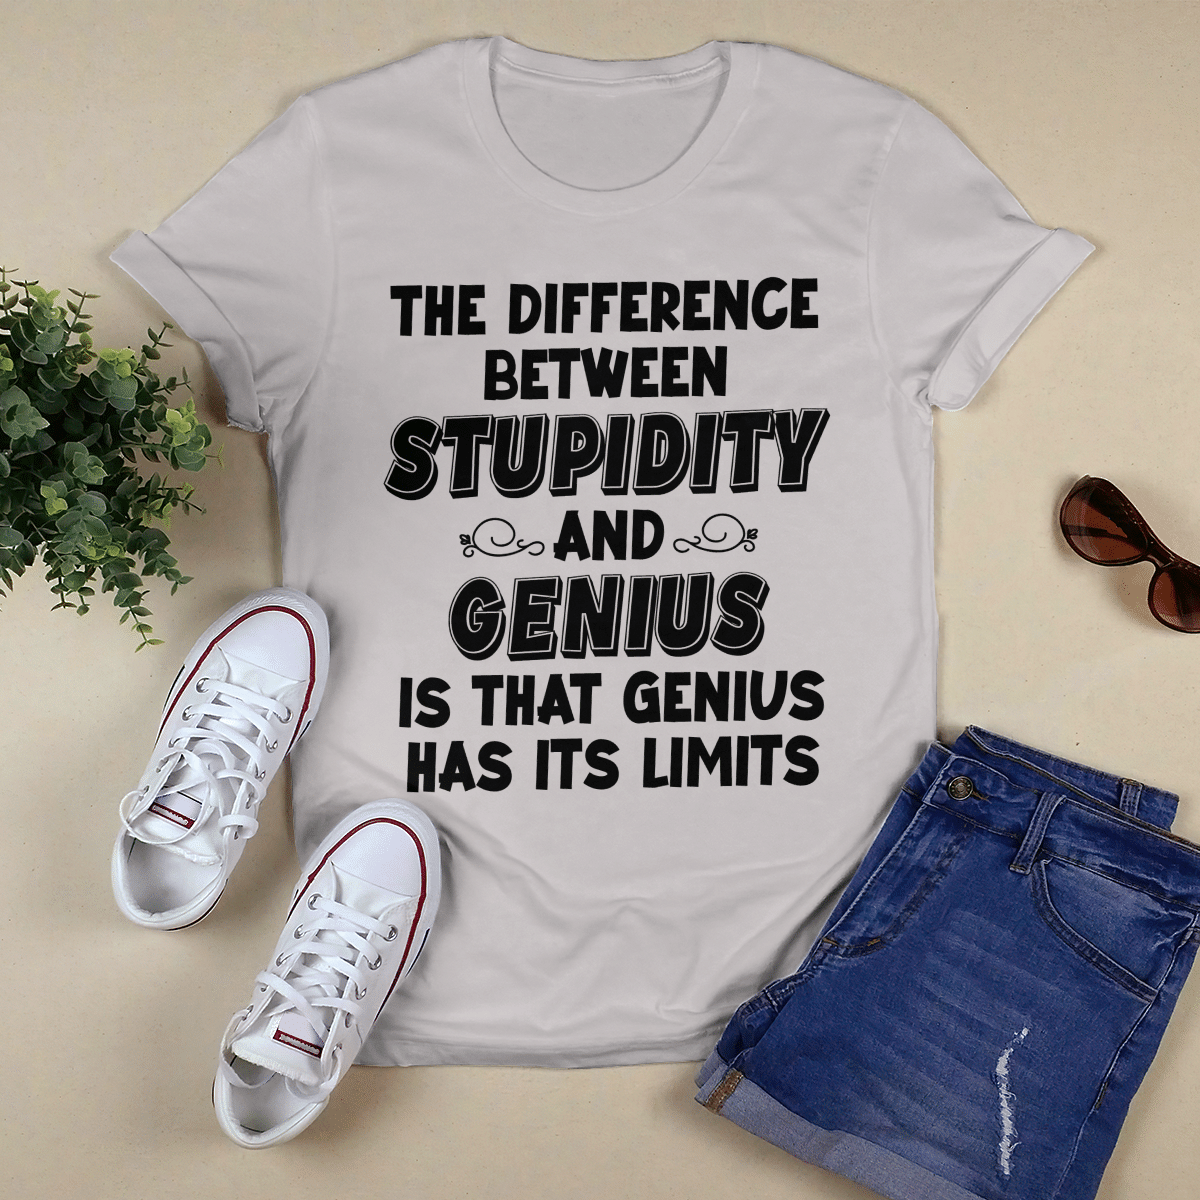 The Difference Between Stupidity And Genius shirt